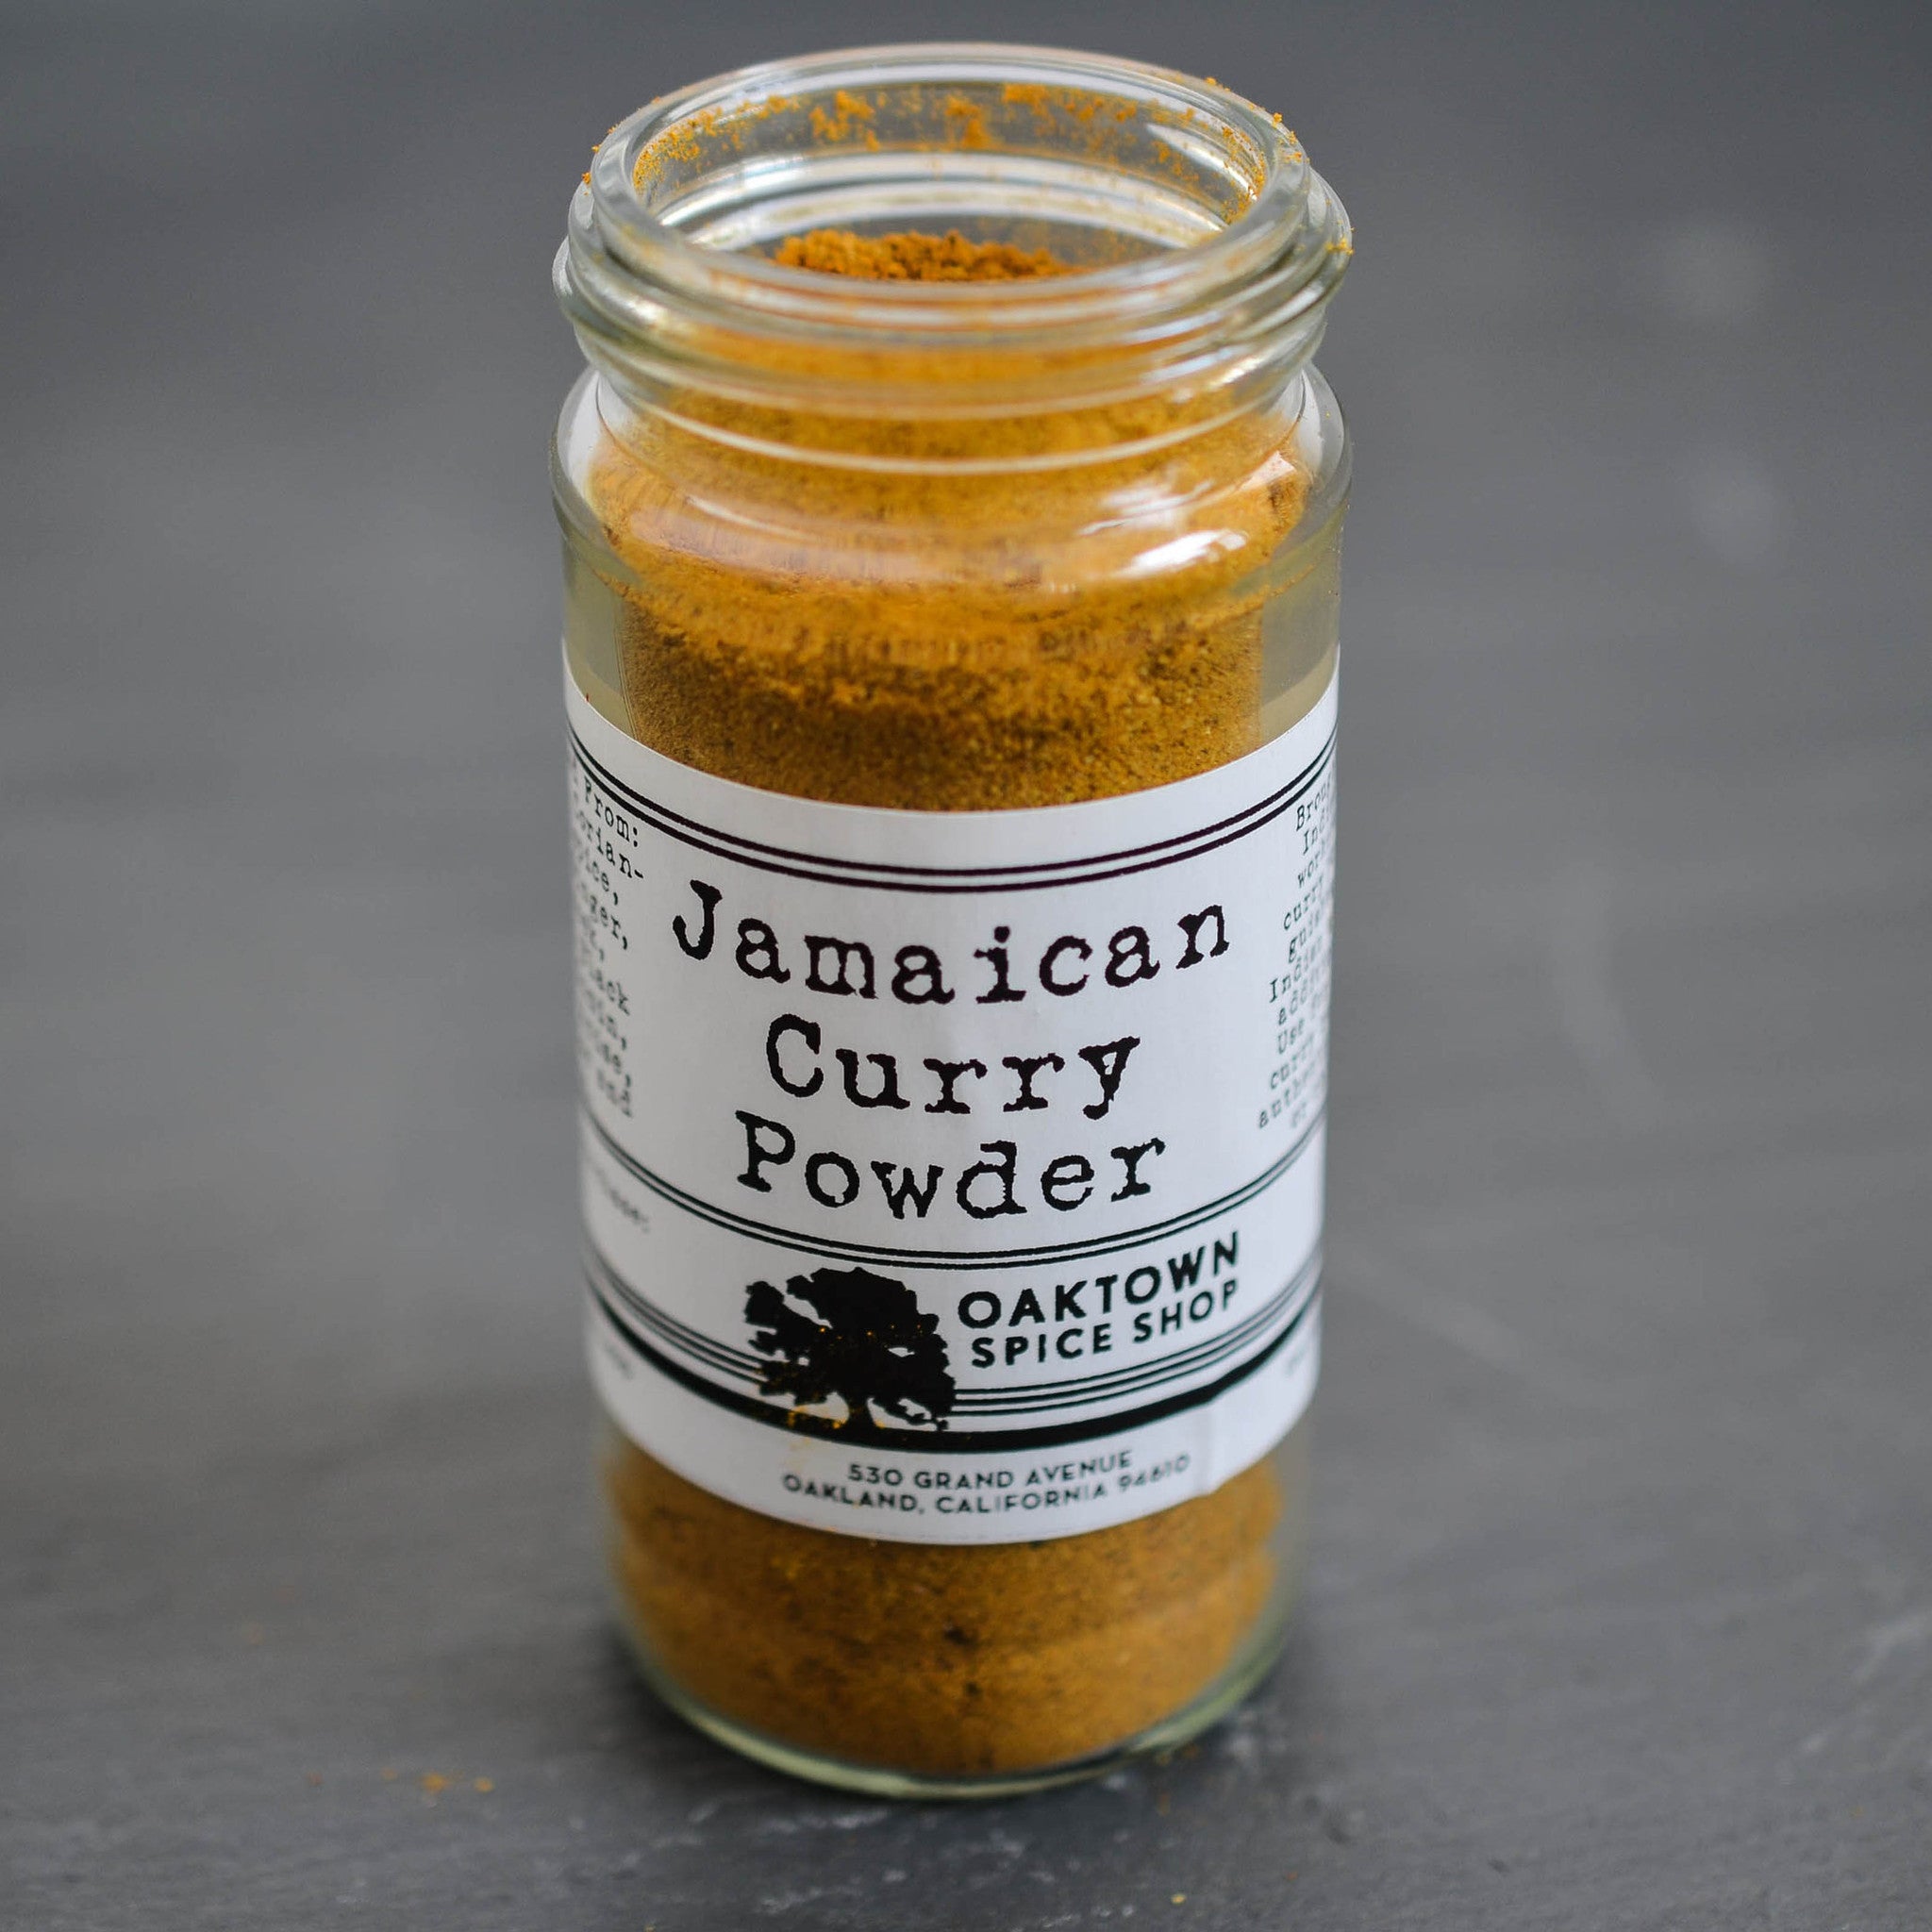 Jamaican Curry Powder this curry powder distinguishes itself from Indian styles with the addition of allspice at Oaktown Spice Shop